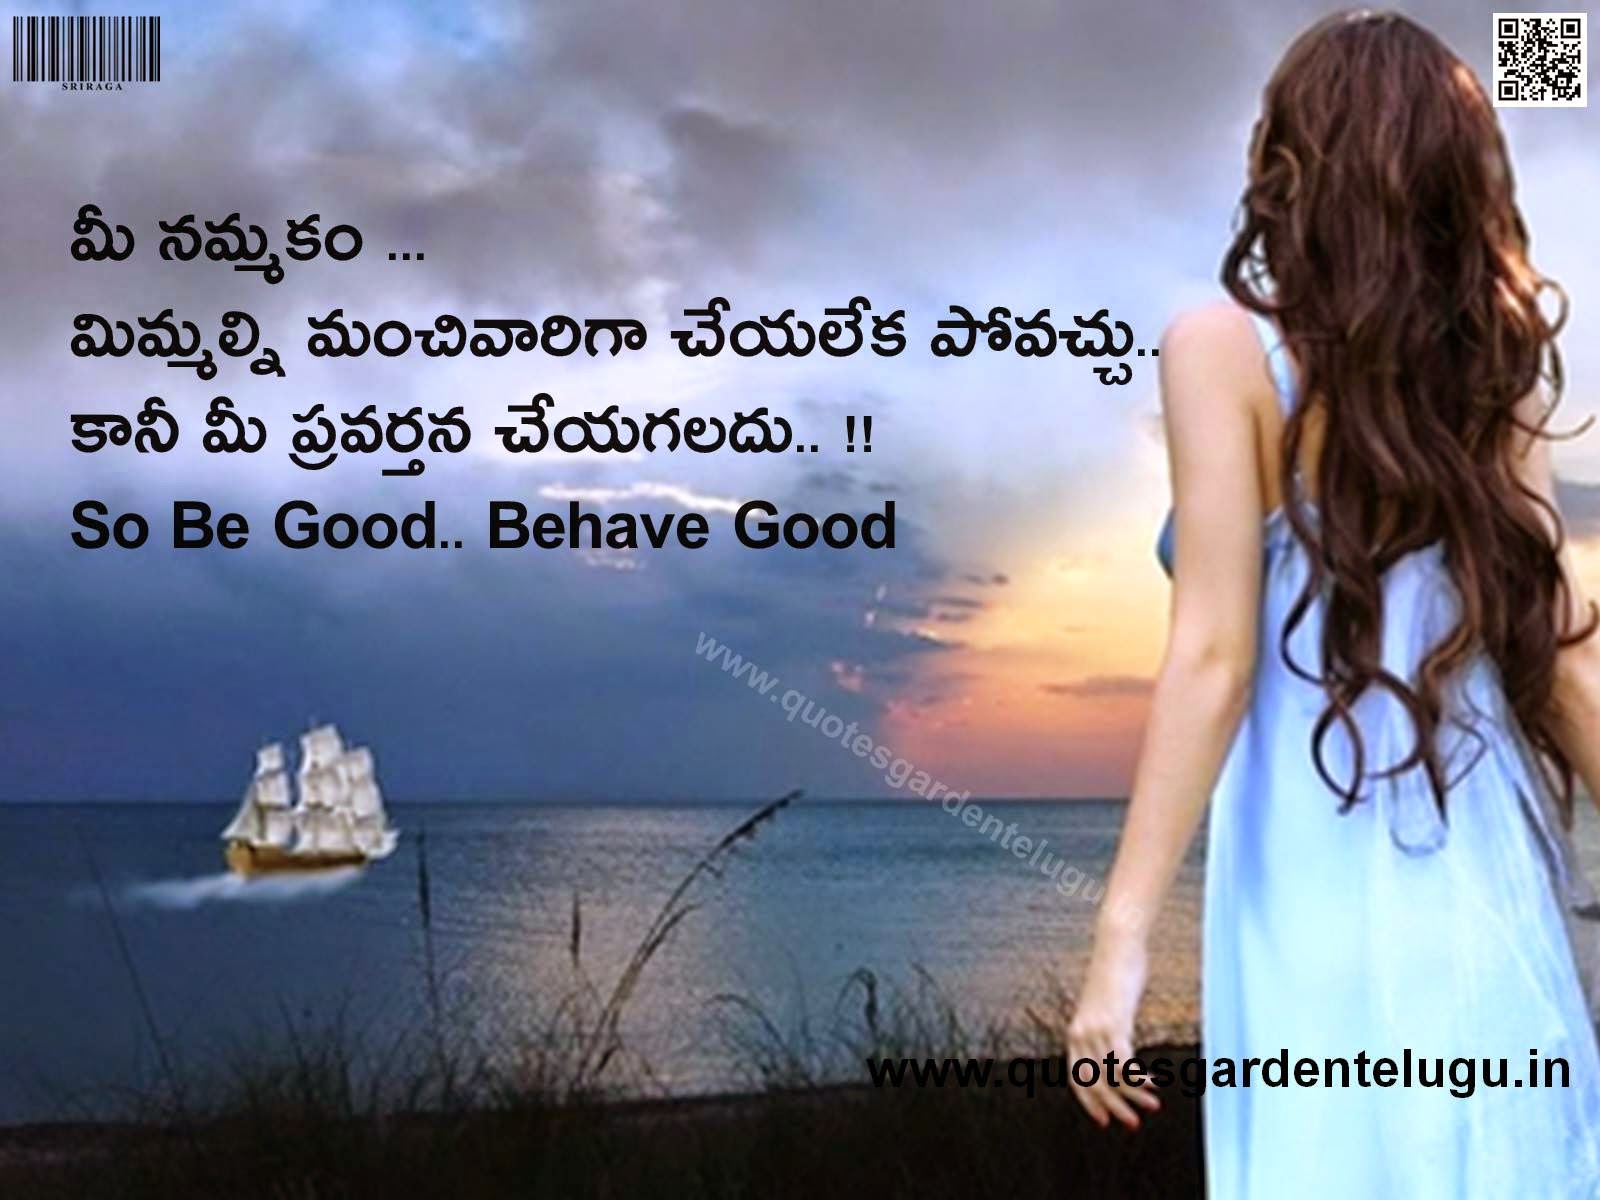 Best Telugu-Whatsapp-Status-Inspirational-Quotes-Good-reads-with-Images-HDwallpapers1